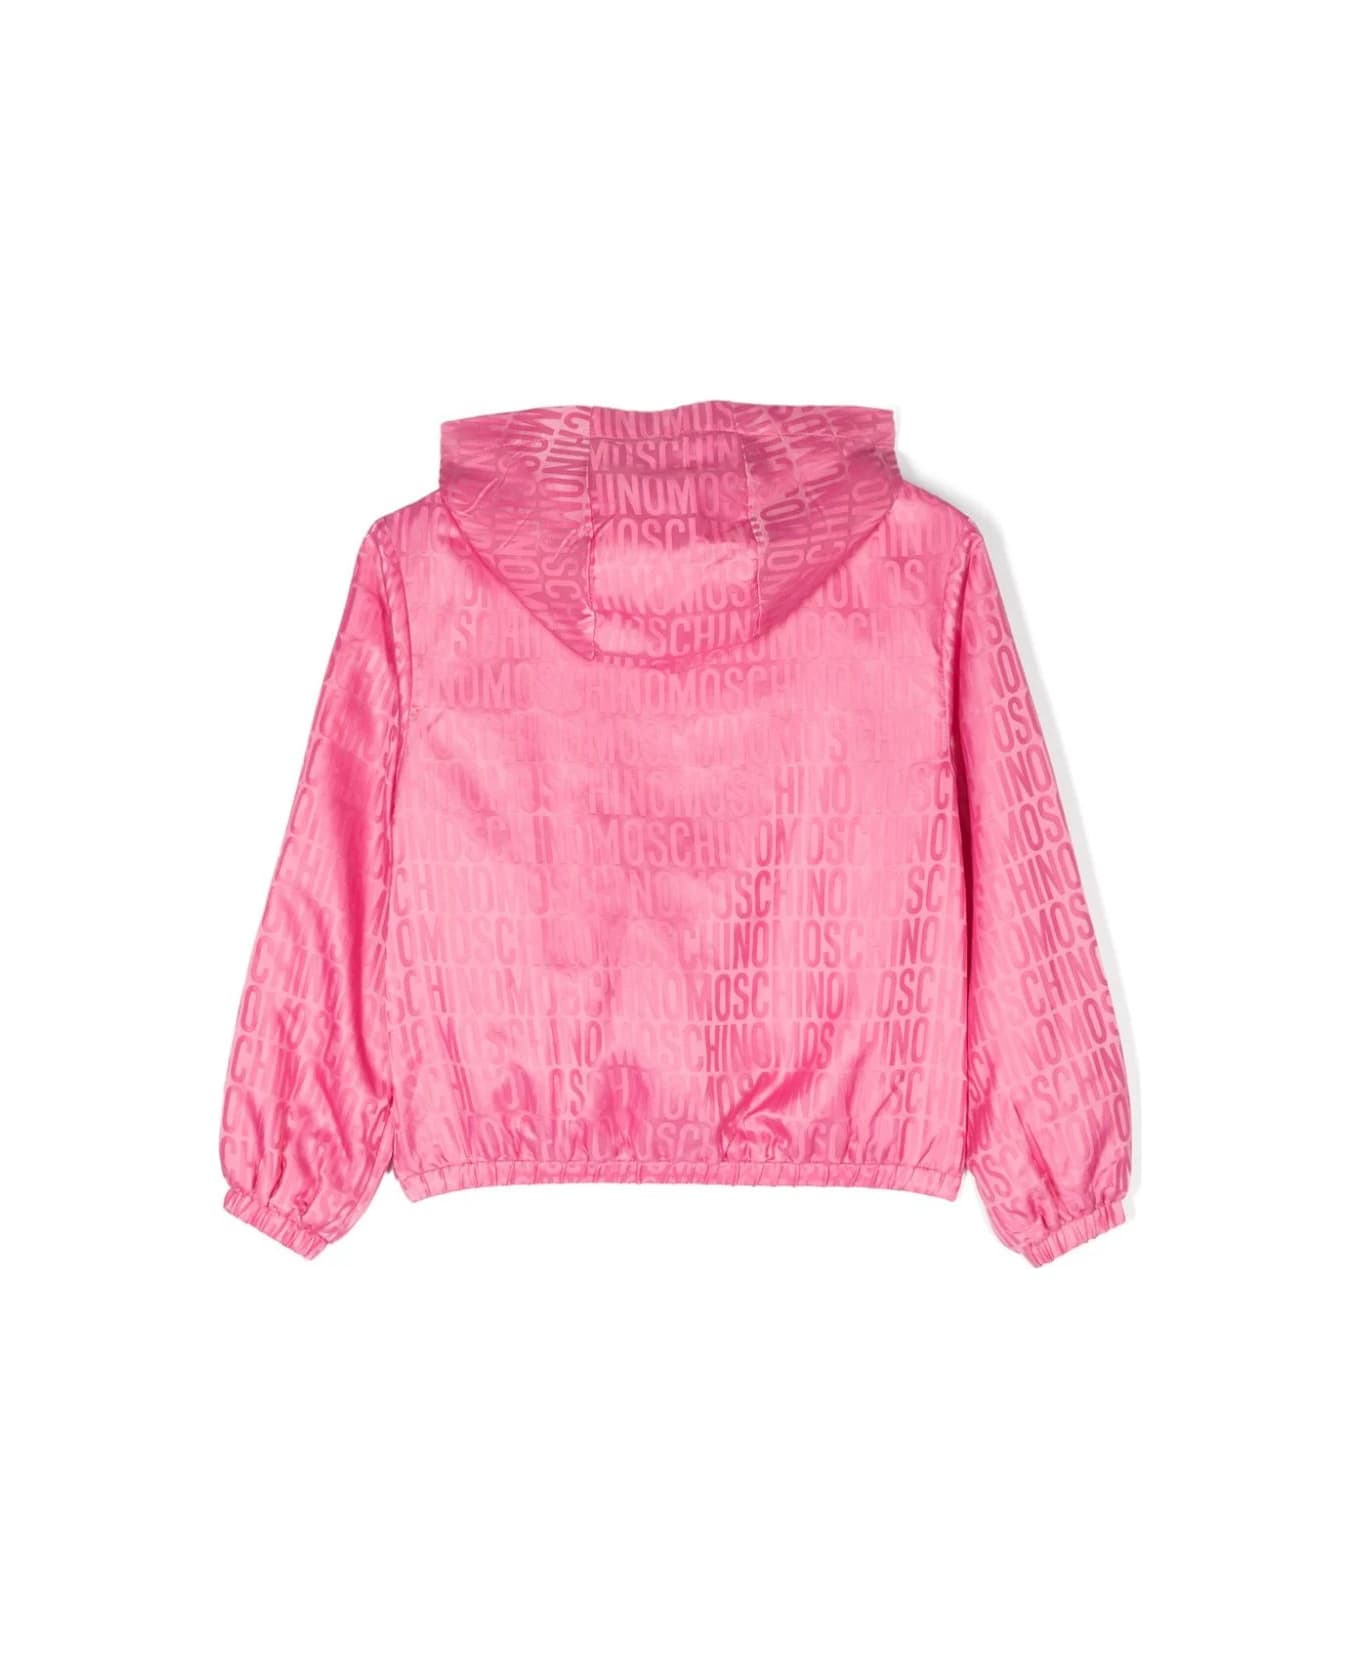 Moschino Pink Windbreaker Jacket With All-over Jacquard Logo - Pink コート＆ジャケット